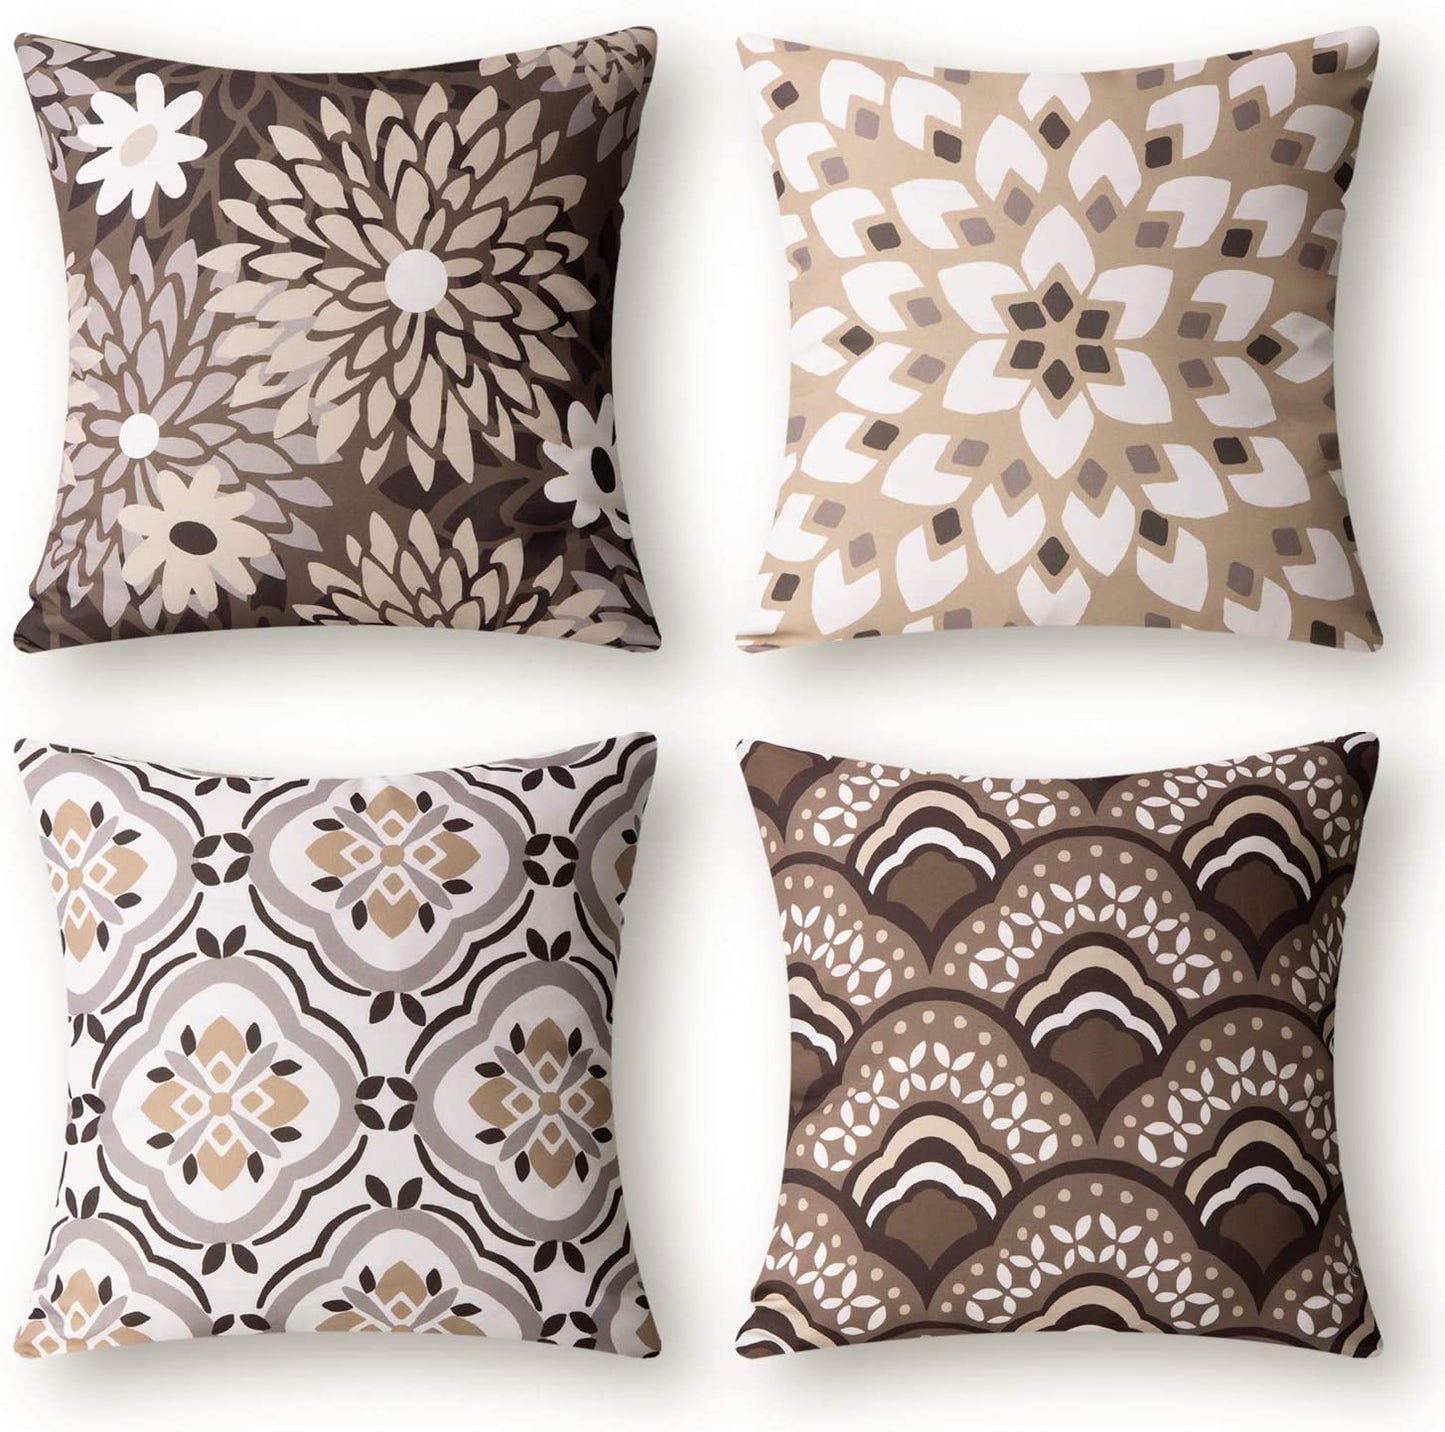 Set of 4 New Living Series Dahlia and Oriental Double Side Print Decorative Throw Pillow Case Cushion Cover